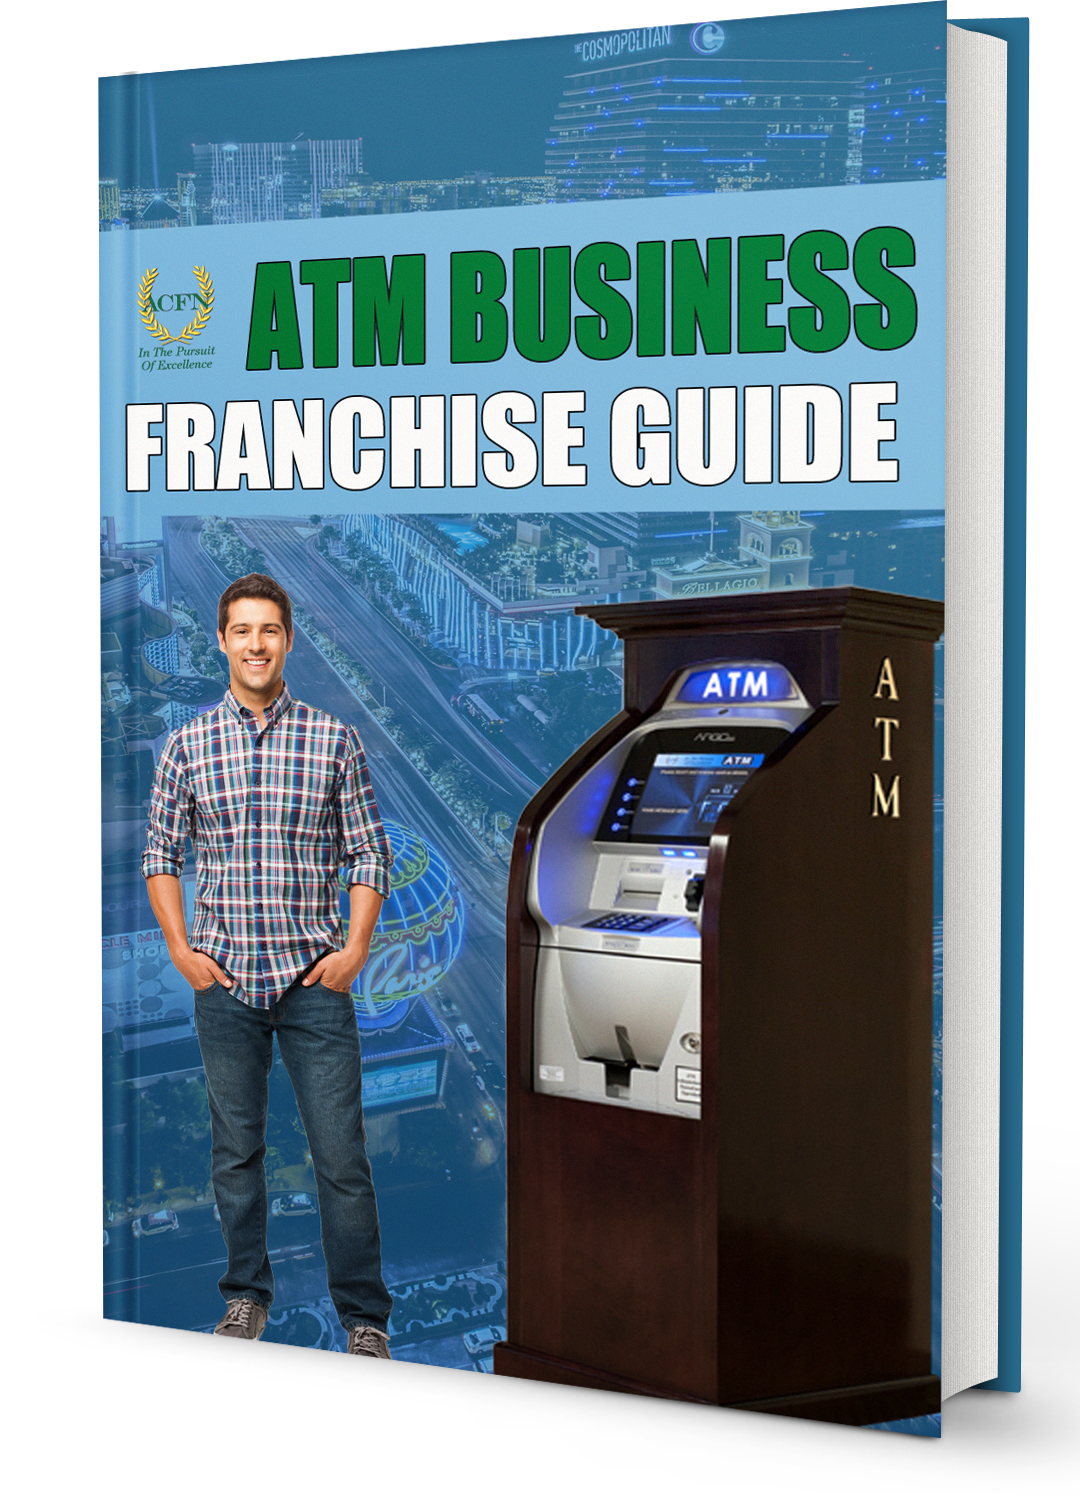 ATM Business Guide